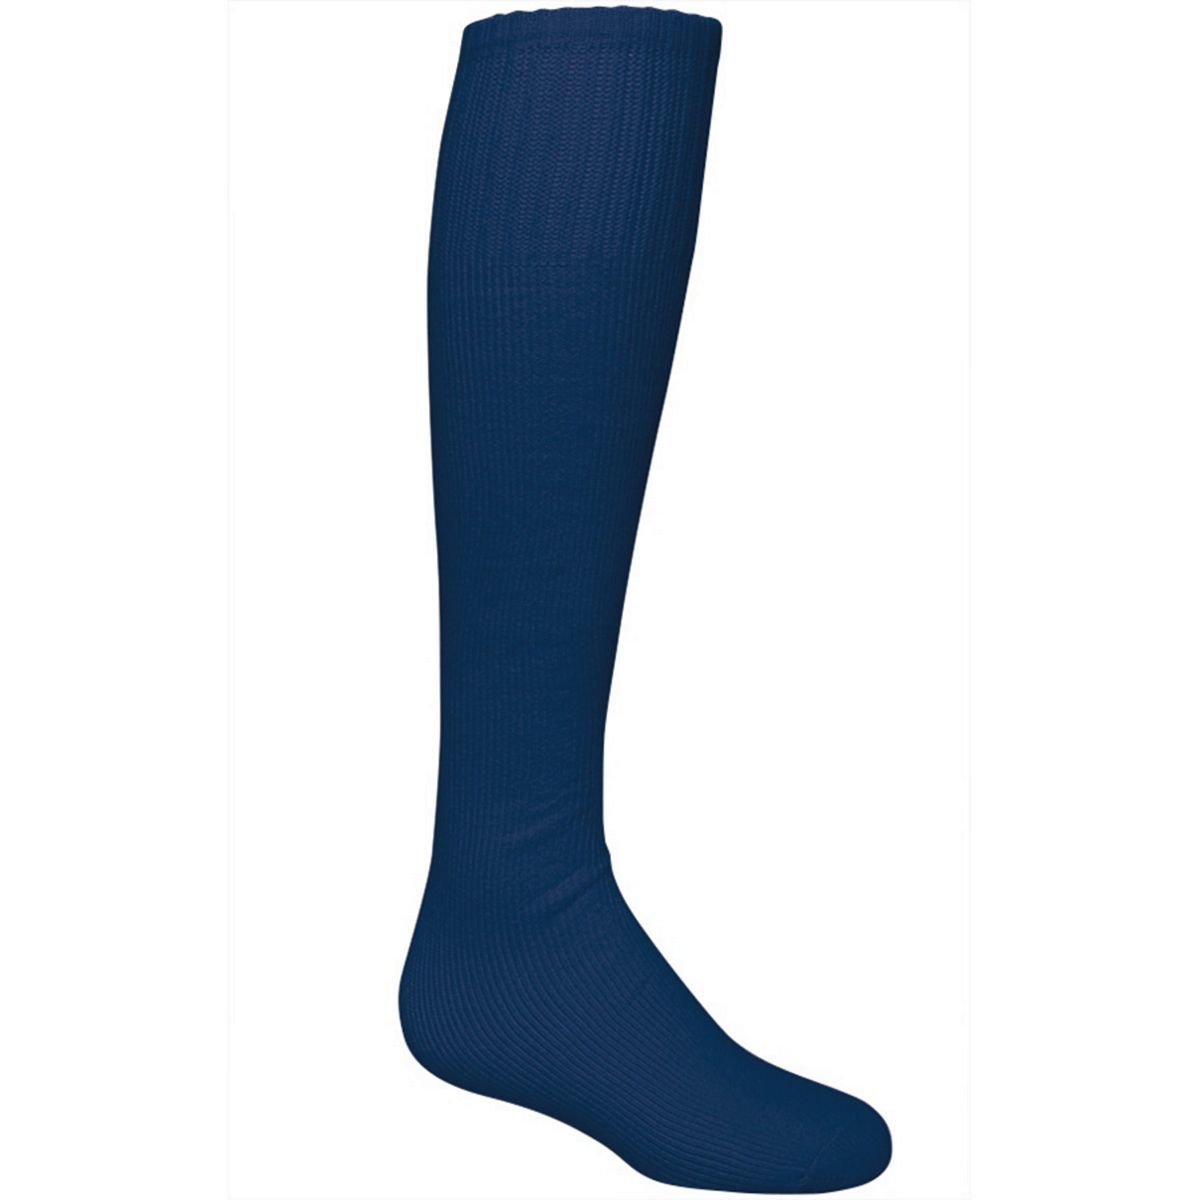 High 5 Athletic  Sock in Navy  -Part of the Accessories, High5-Products, Accessories-Socks product lines at KanaleyCreations.com